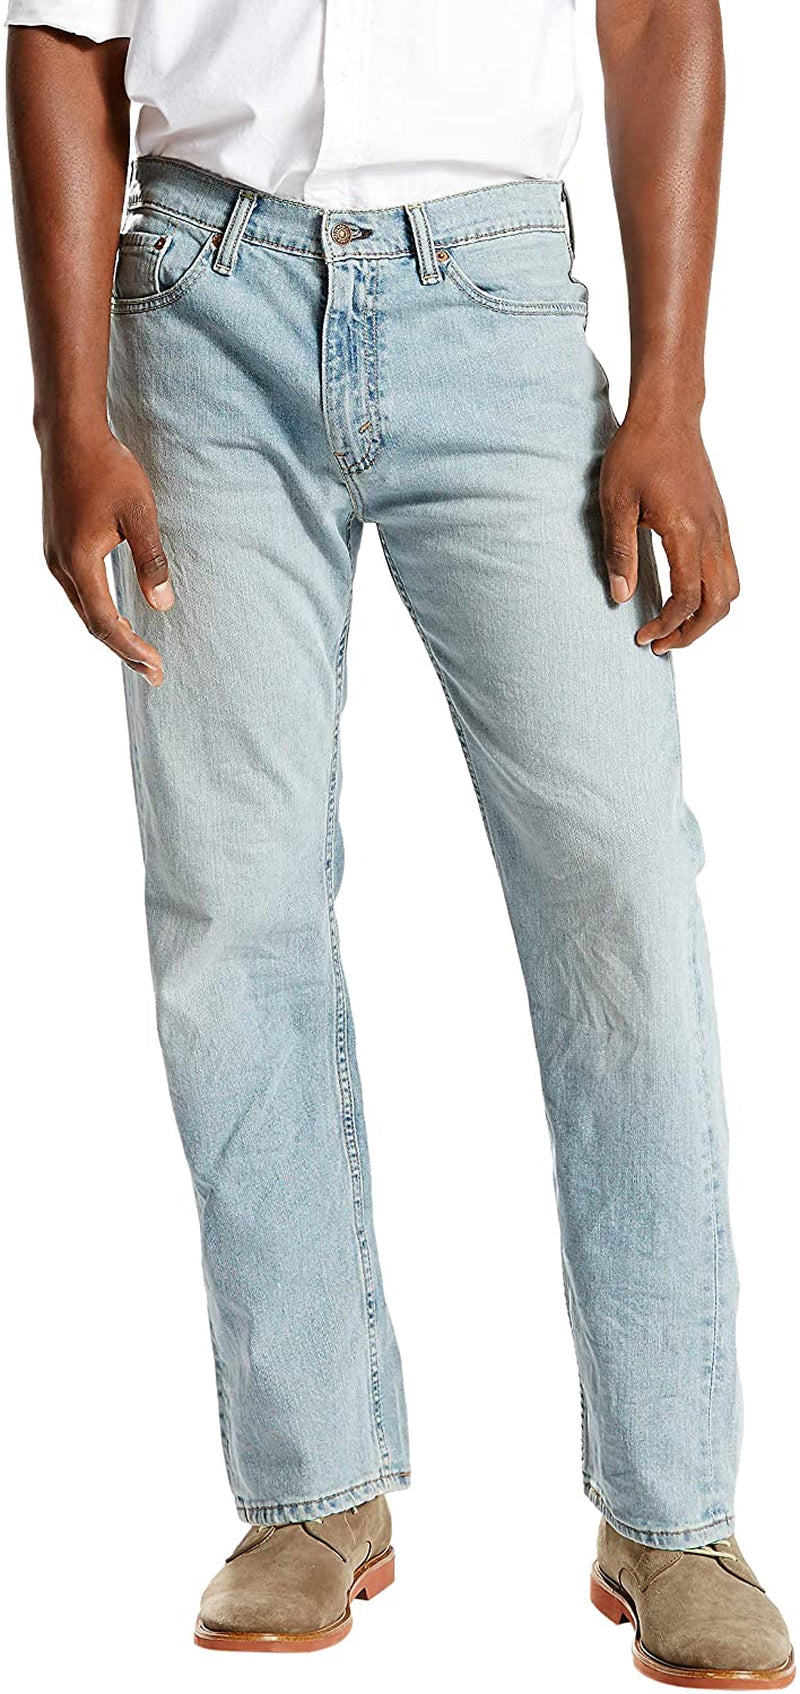 Cotton Levi's jeans in sky blue. Five-pocket styling. Zip-fly. Belt loops at waistband. 